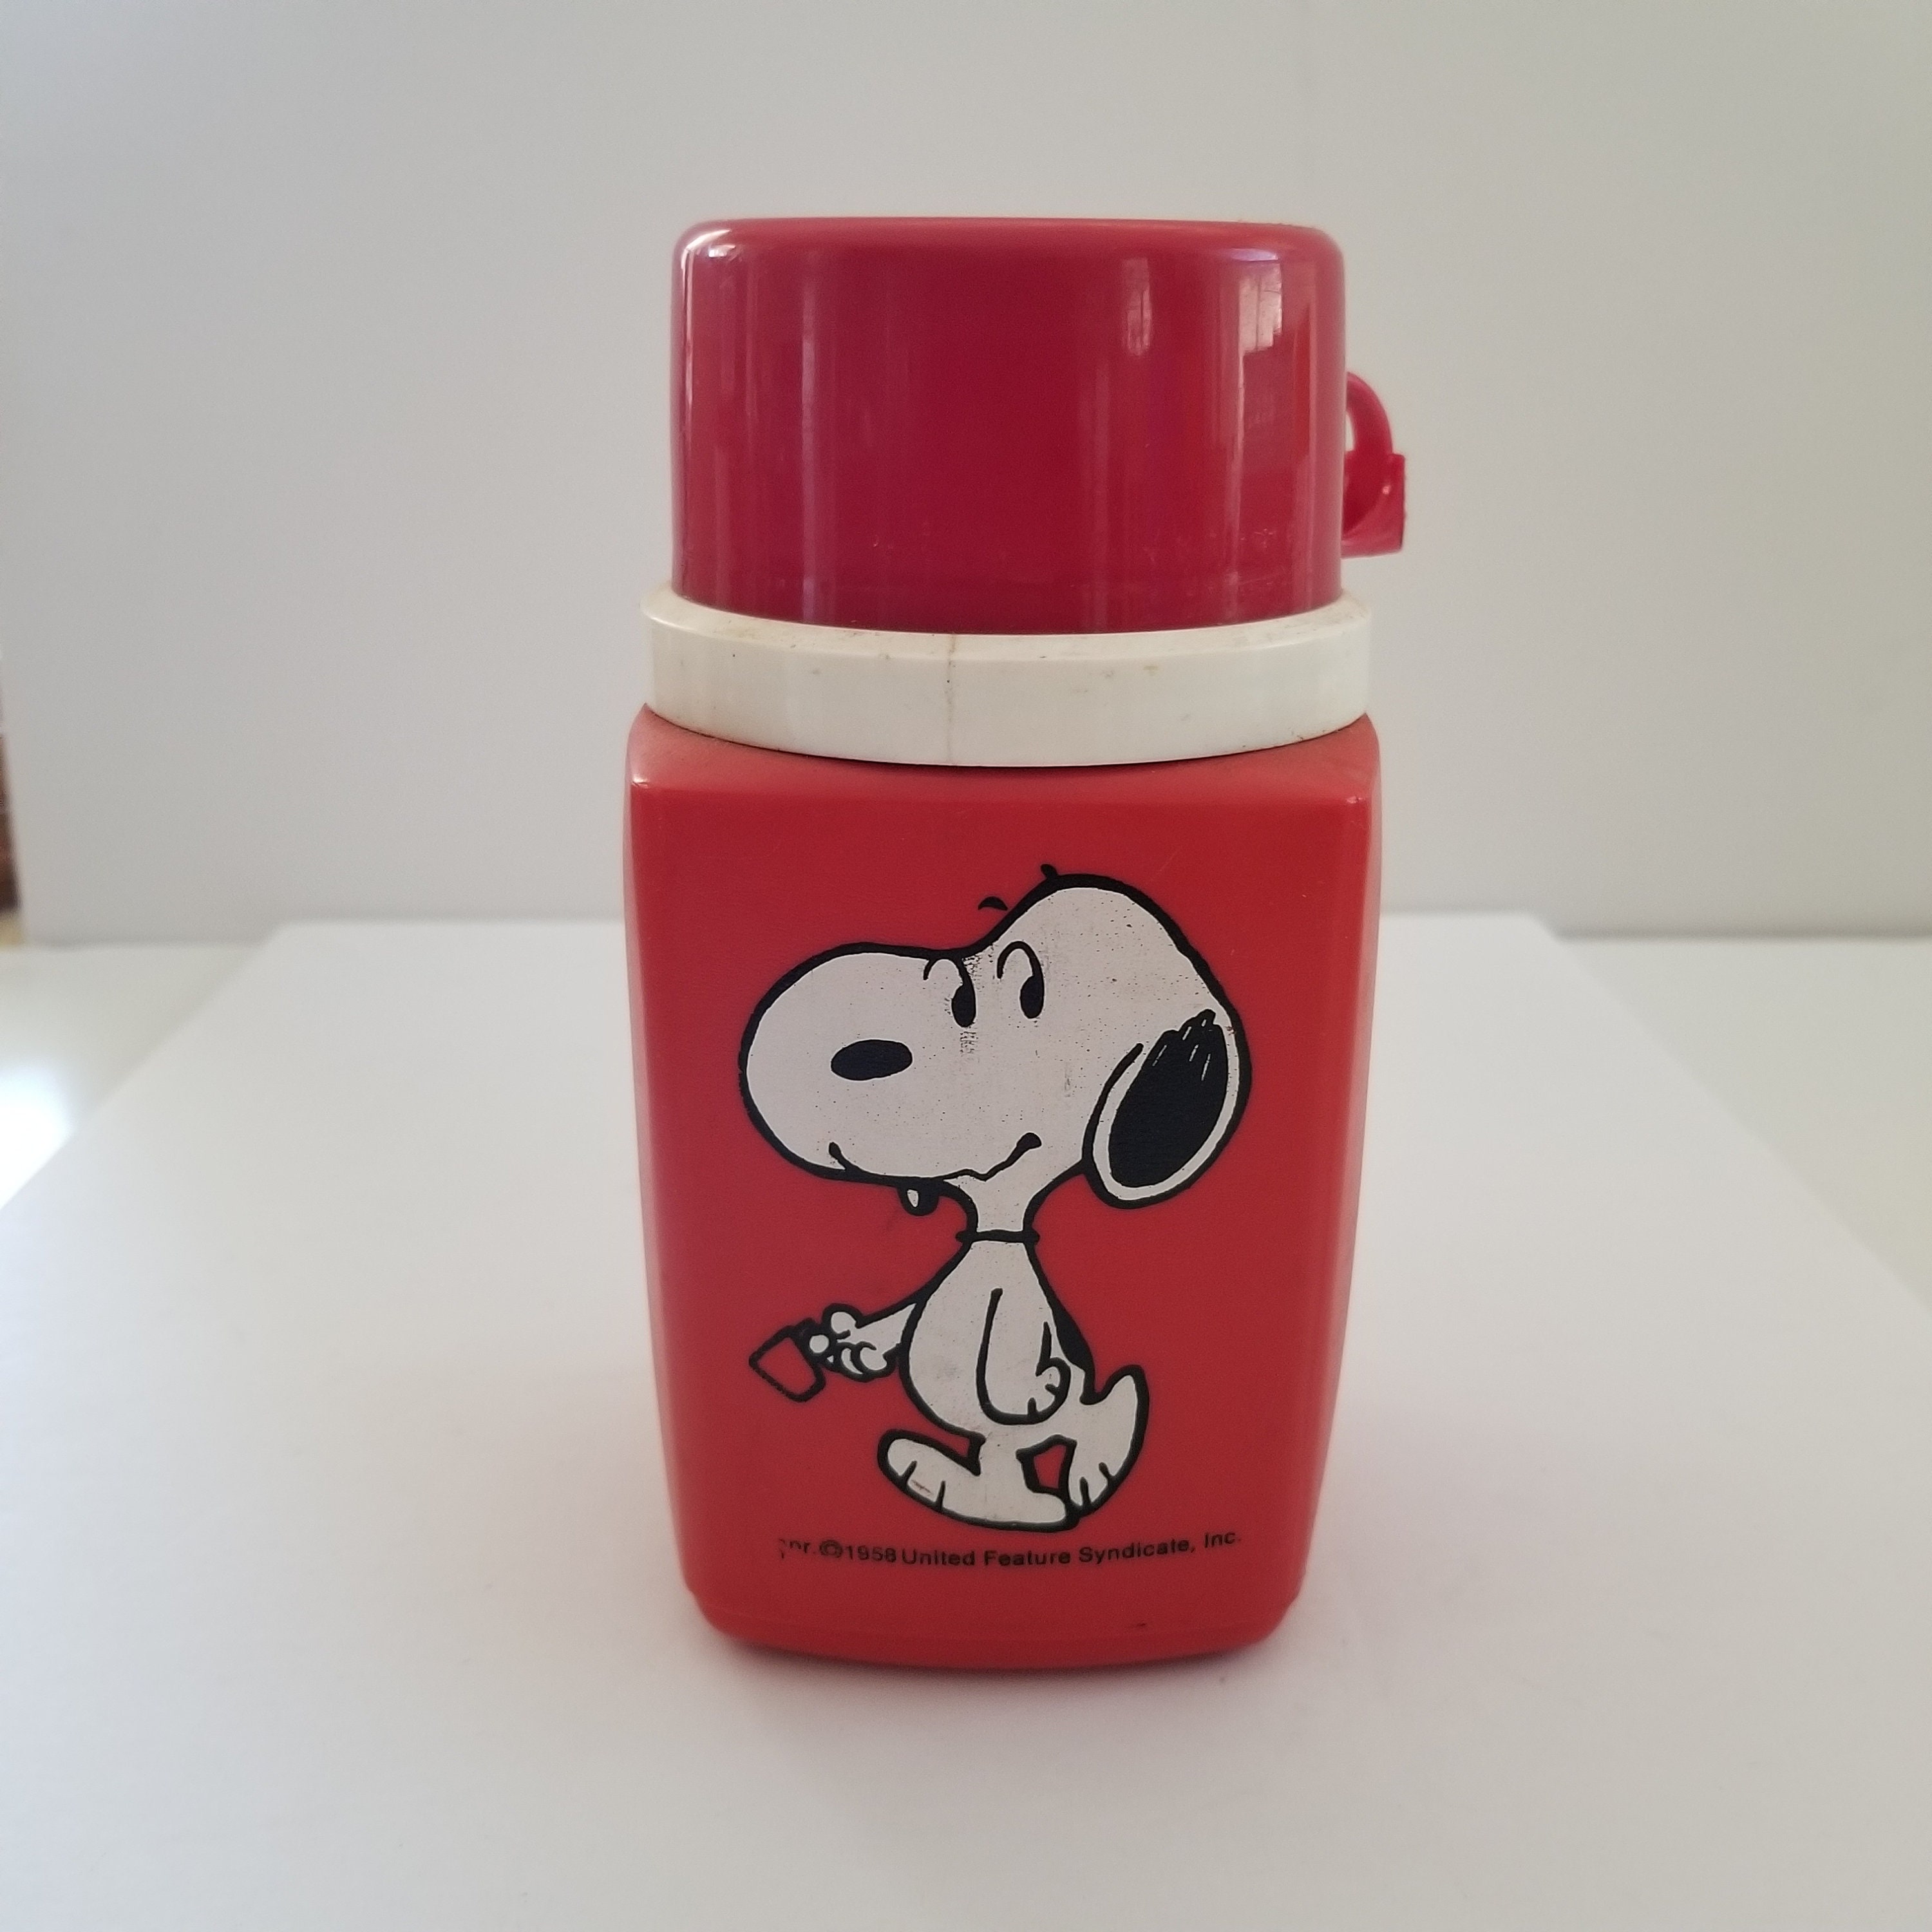 Vintage Japanese Cartoon Thermos With Strap, Red and Gold, Tokyo Royal  Kasei Co. 750 Ml 30 Mm SR-750 